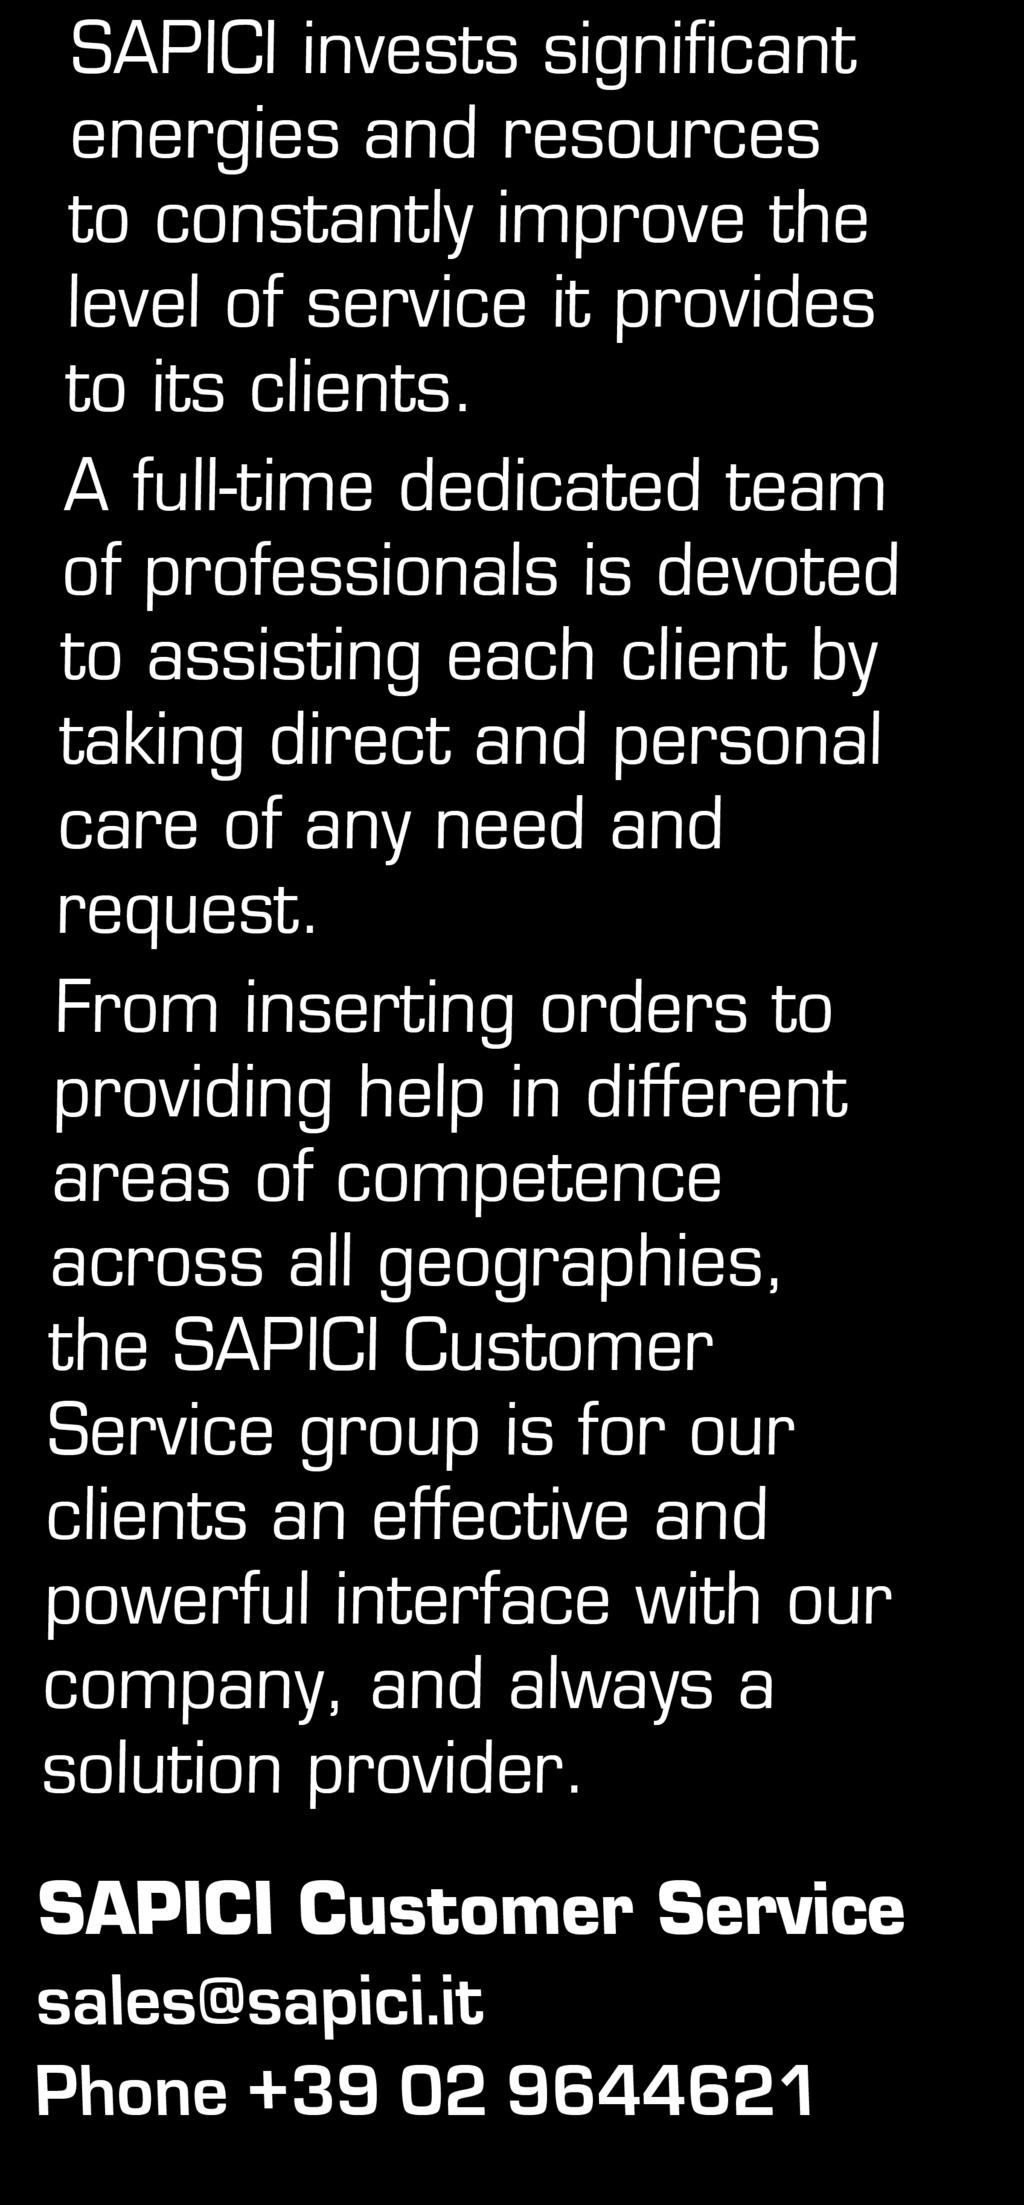 From inserting orders to providing help in different areas of competence across all geographies, the SAPICI Customer Service group is for our clients an effective and powerful interface with our